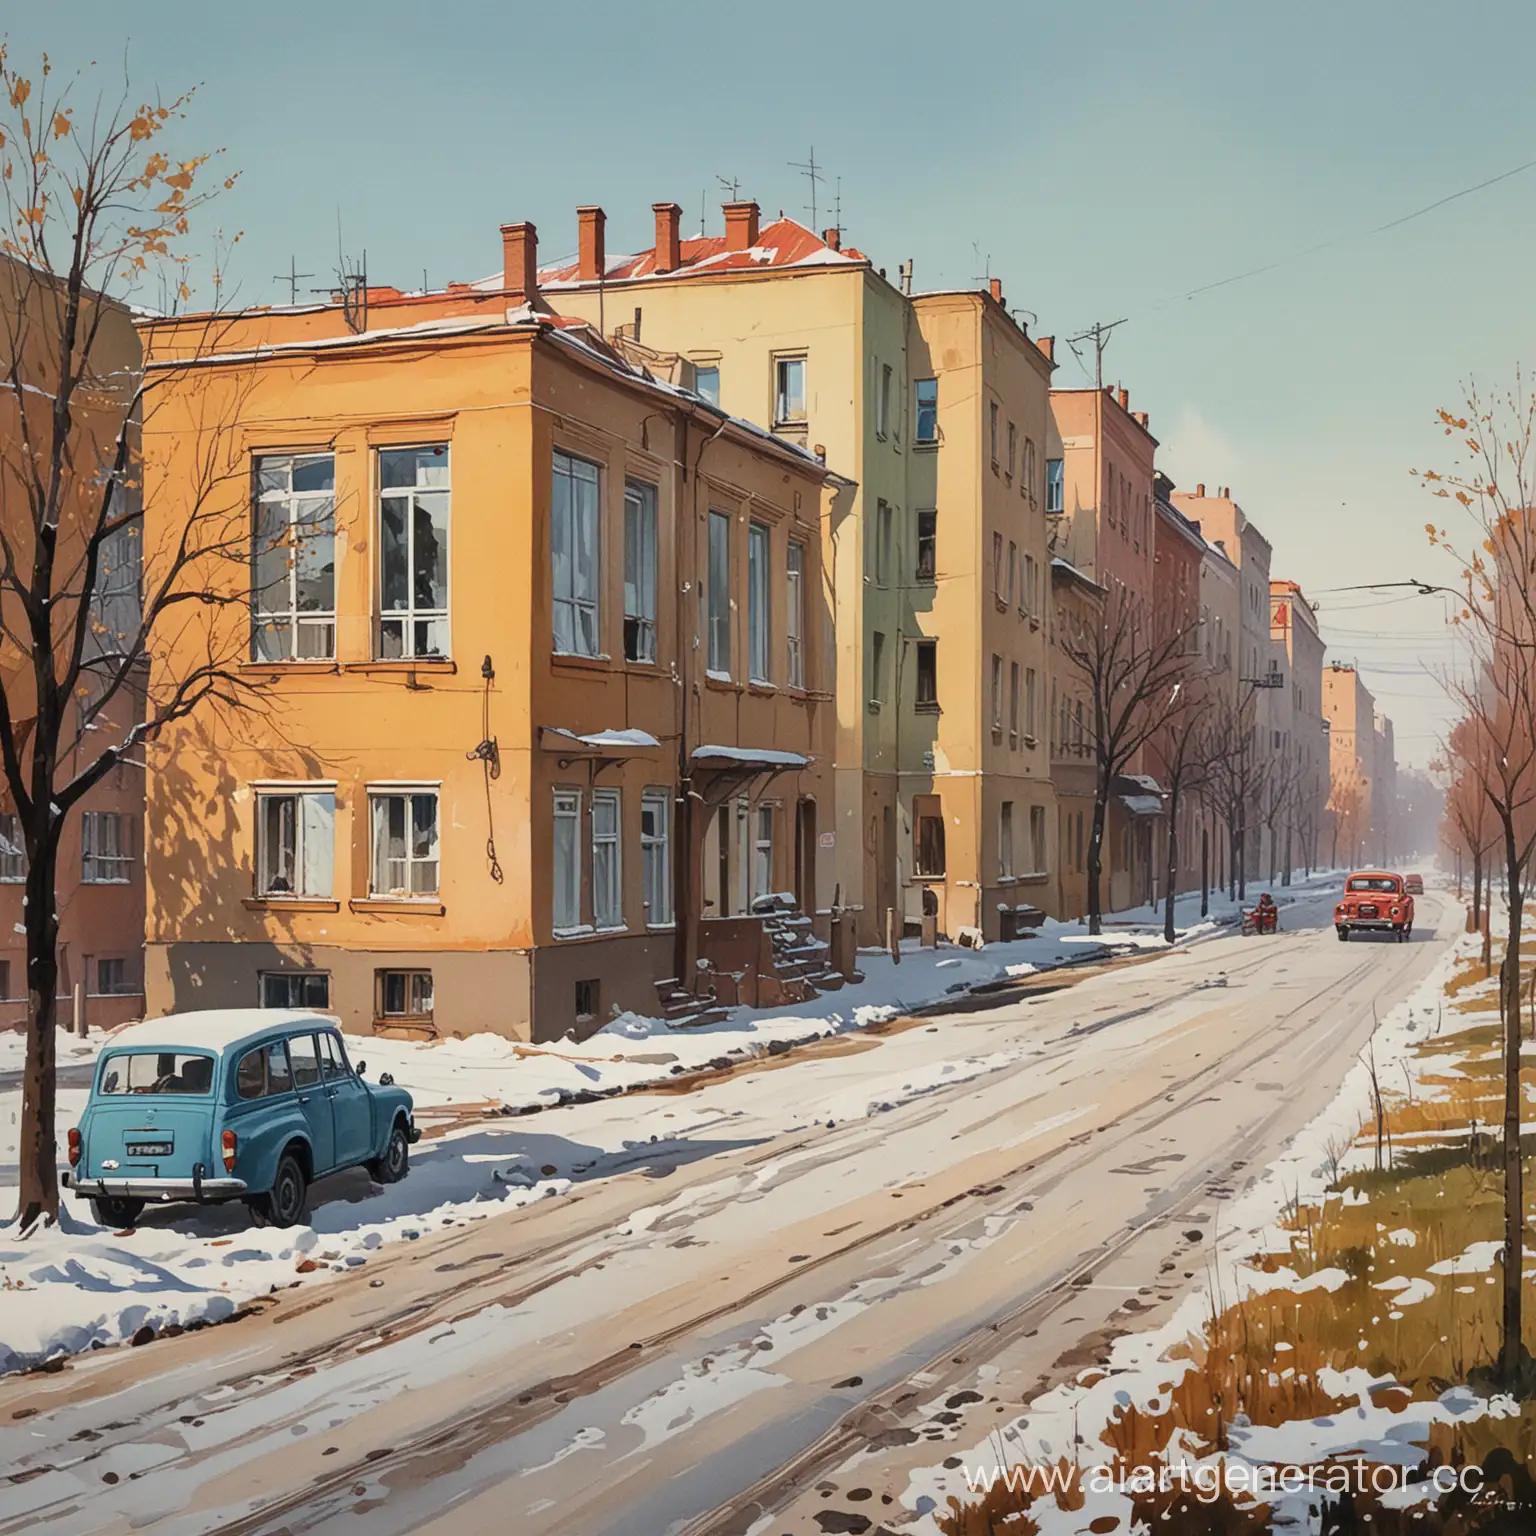 Vibrant-Sovietera-Daily-Life-Depicted-in-Gouache